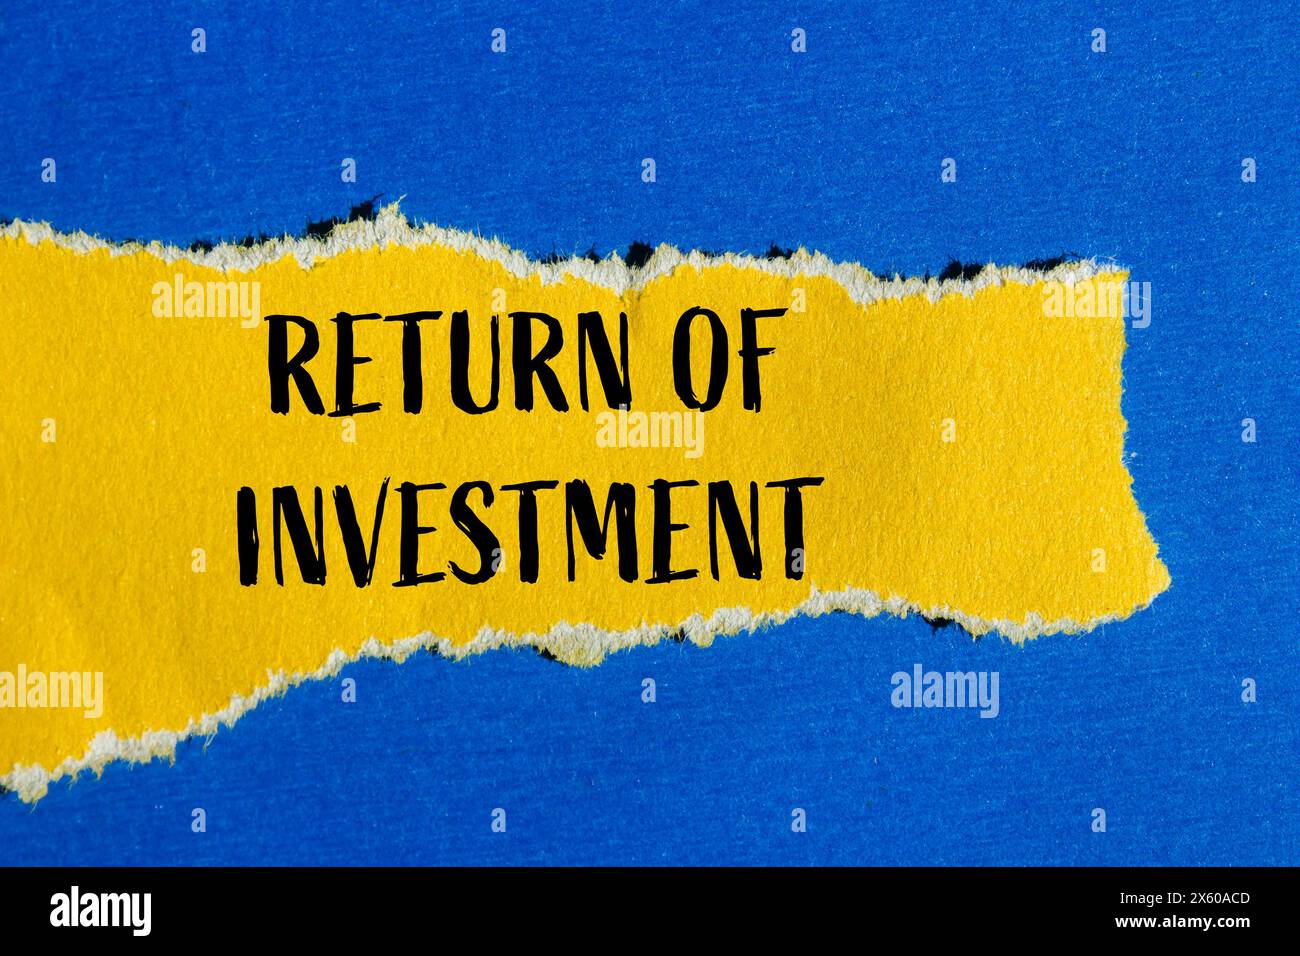 Return of investment words written on ripped yellow paper with blue background. Conceptual return of investment and business symbol. Copy space. Stock Photo